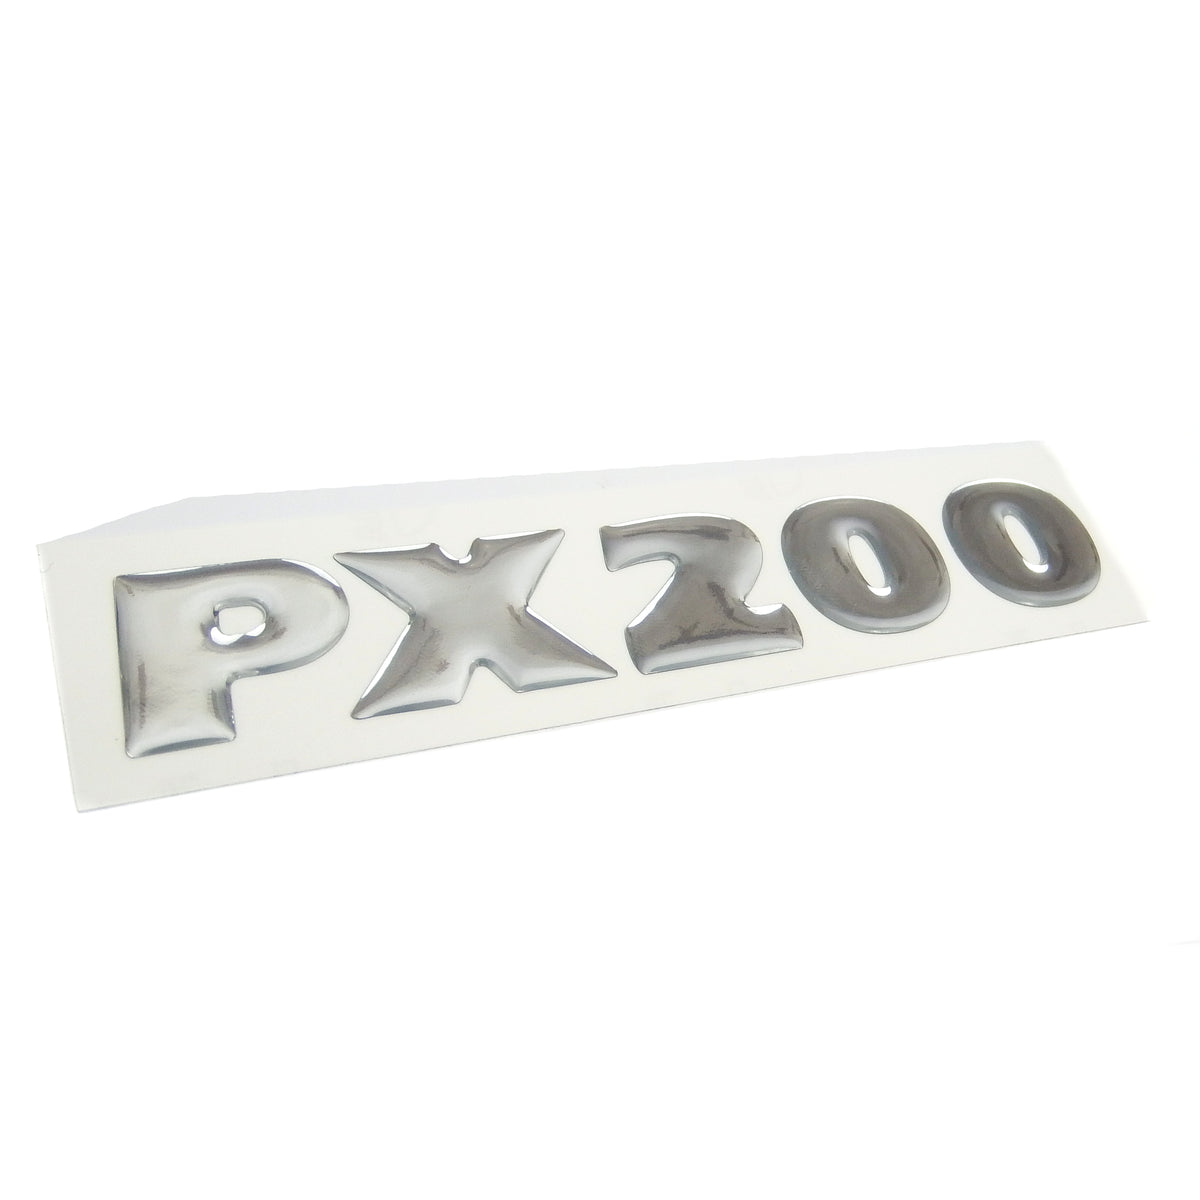 Vespa PX 200 Side Panel Resin Badge (New PX 2001- Style)